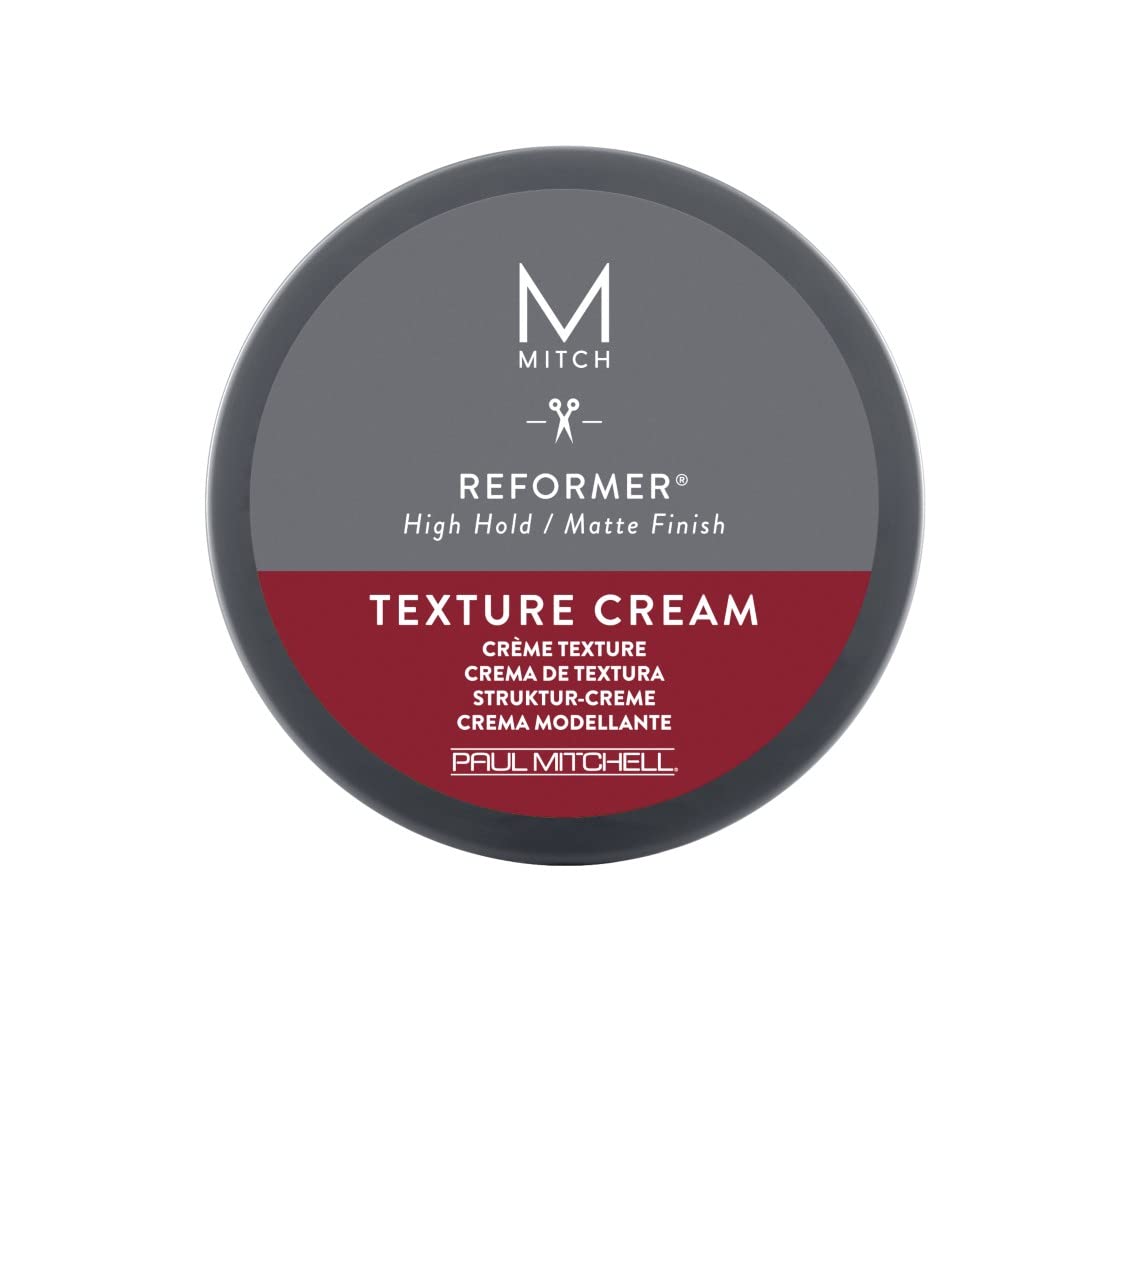 Paul Mitchell MITCH Reformer Texturizing Hair Putty for Men, Strong Hold,  Matte Finish, For All Hair Types, Especially Fine to Medium Hair, 3 Oz